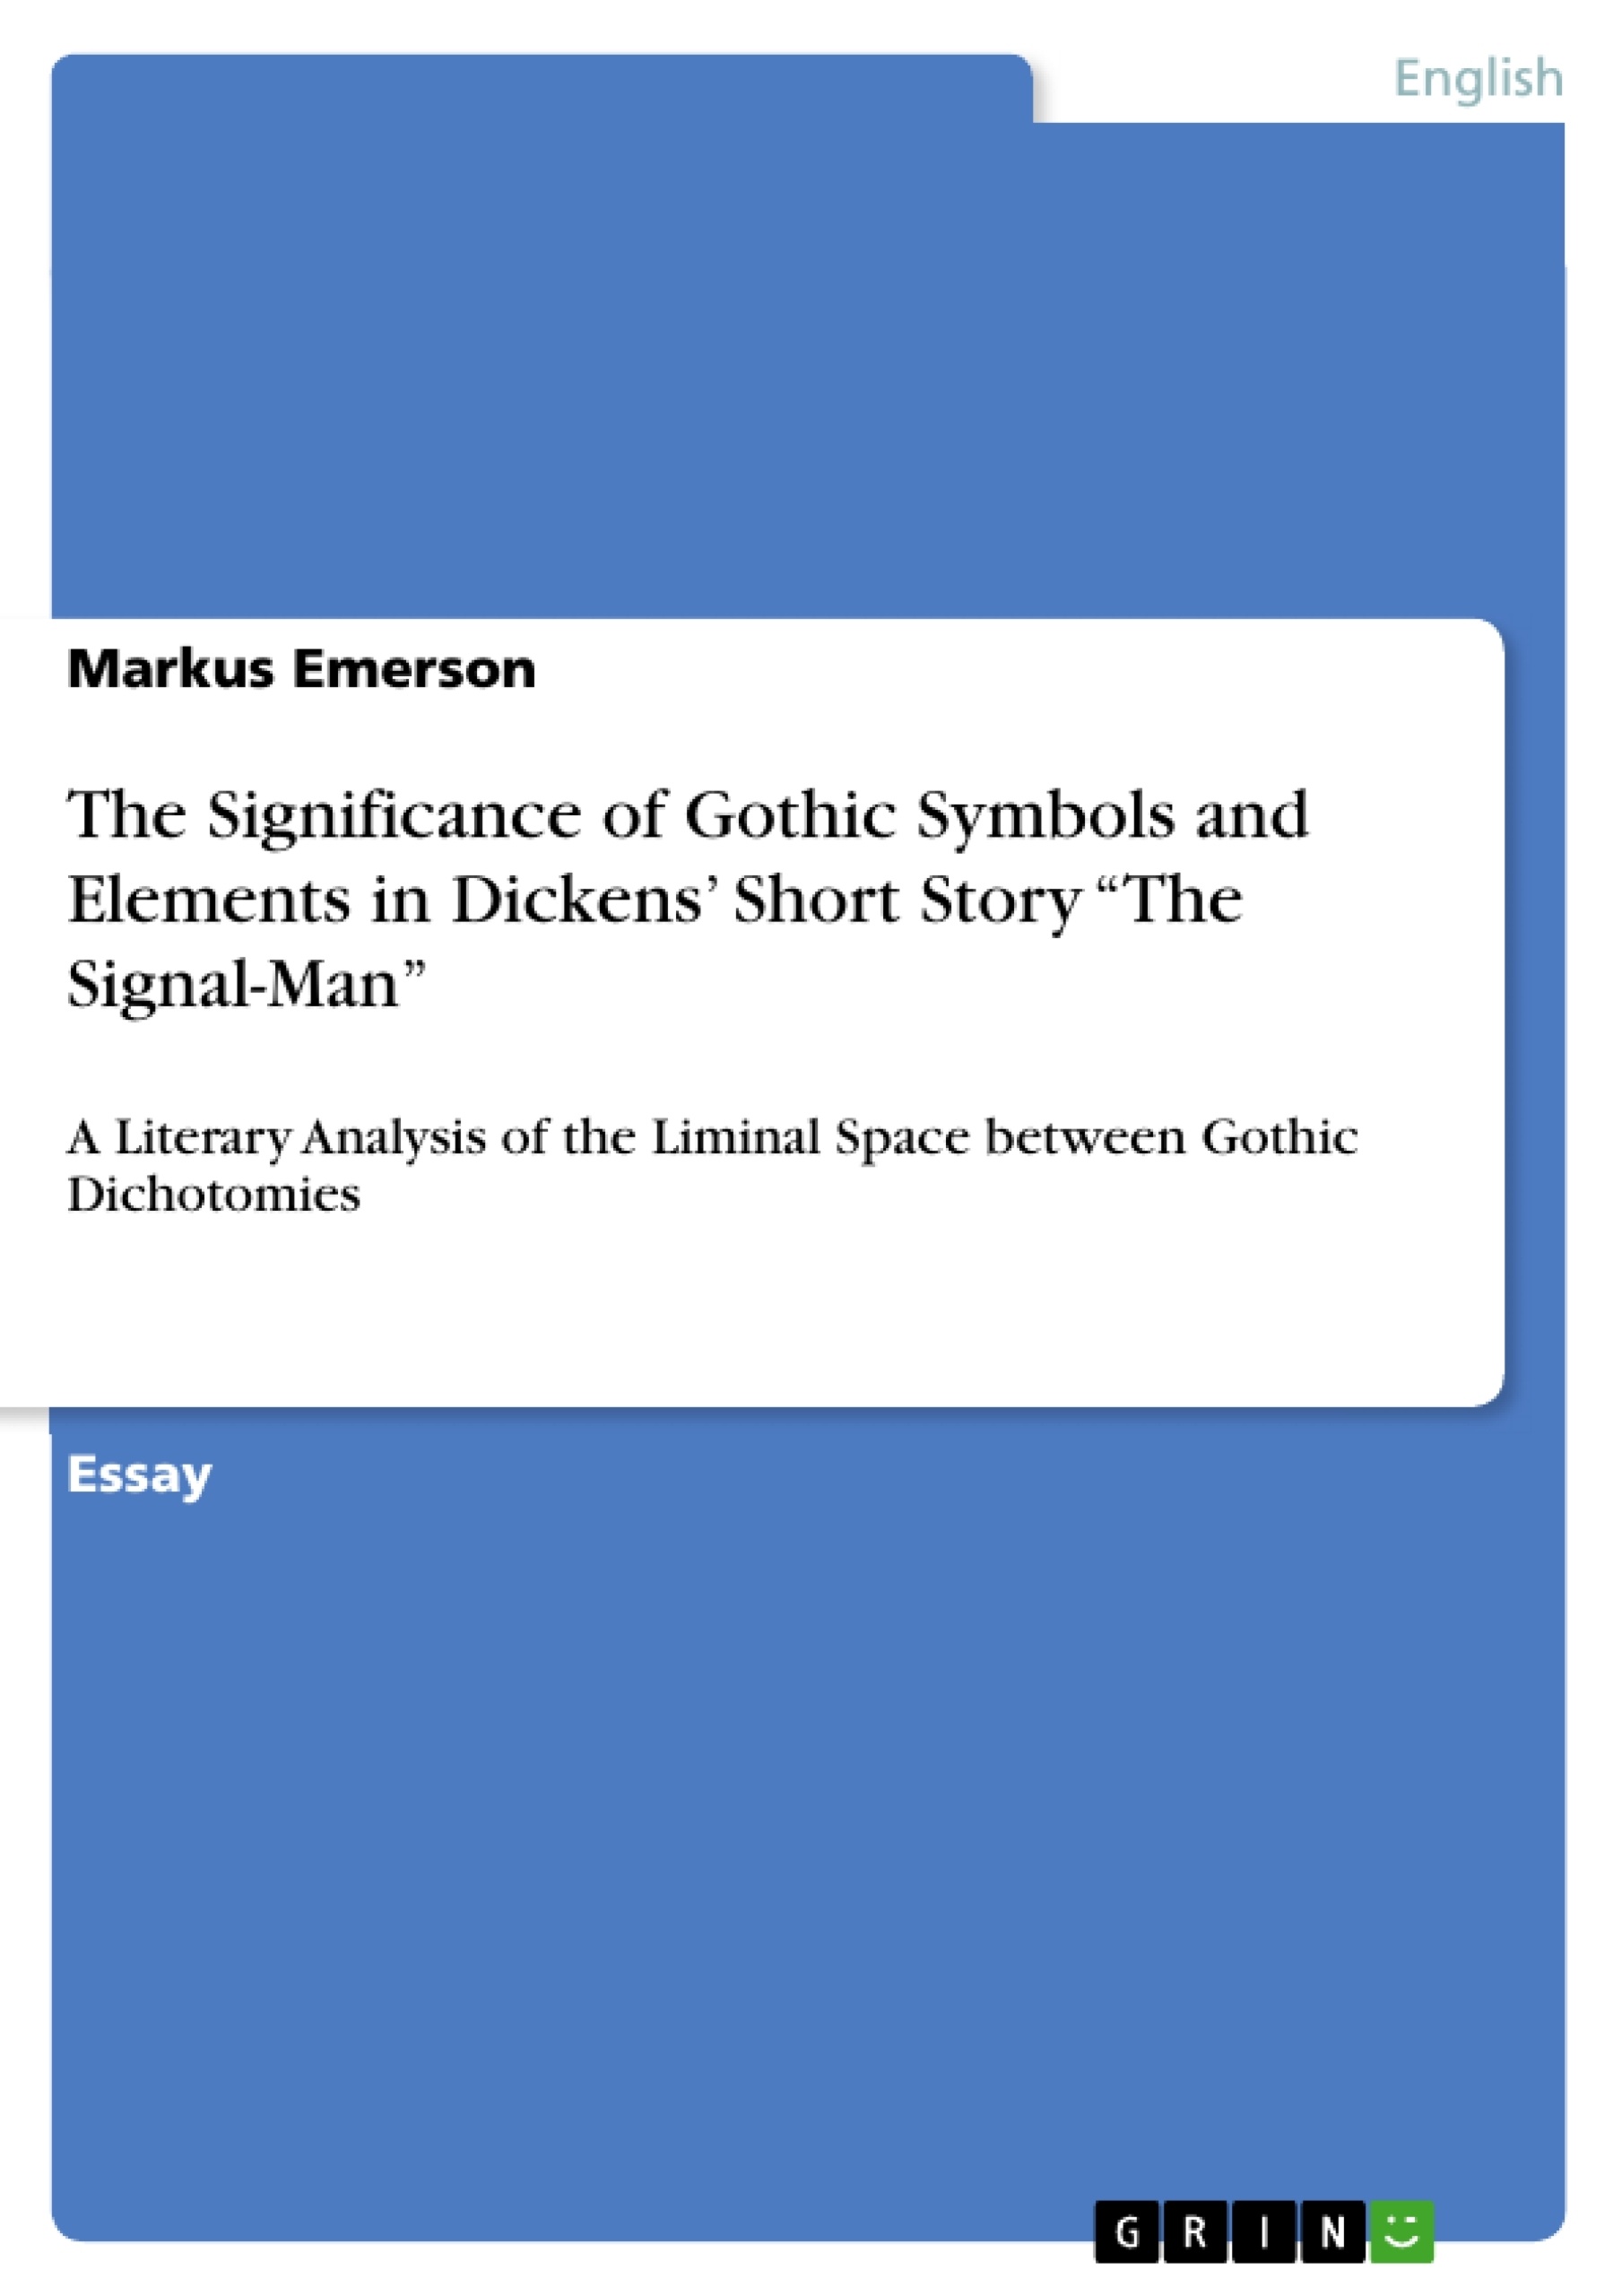 Title: The Significance of Gothic Symbols and Elements in Dickens’ Short Story “The Signal-Man”